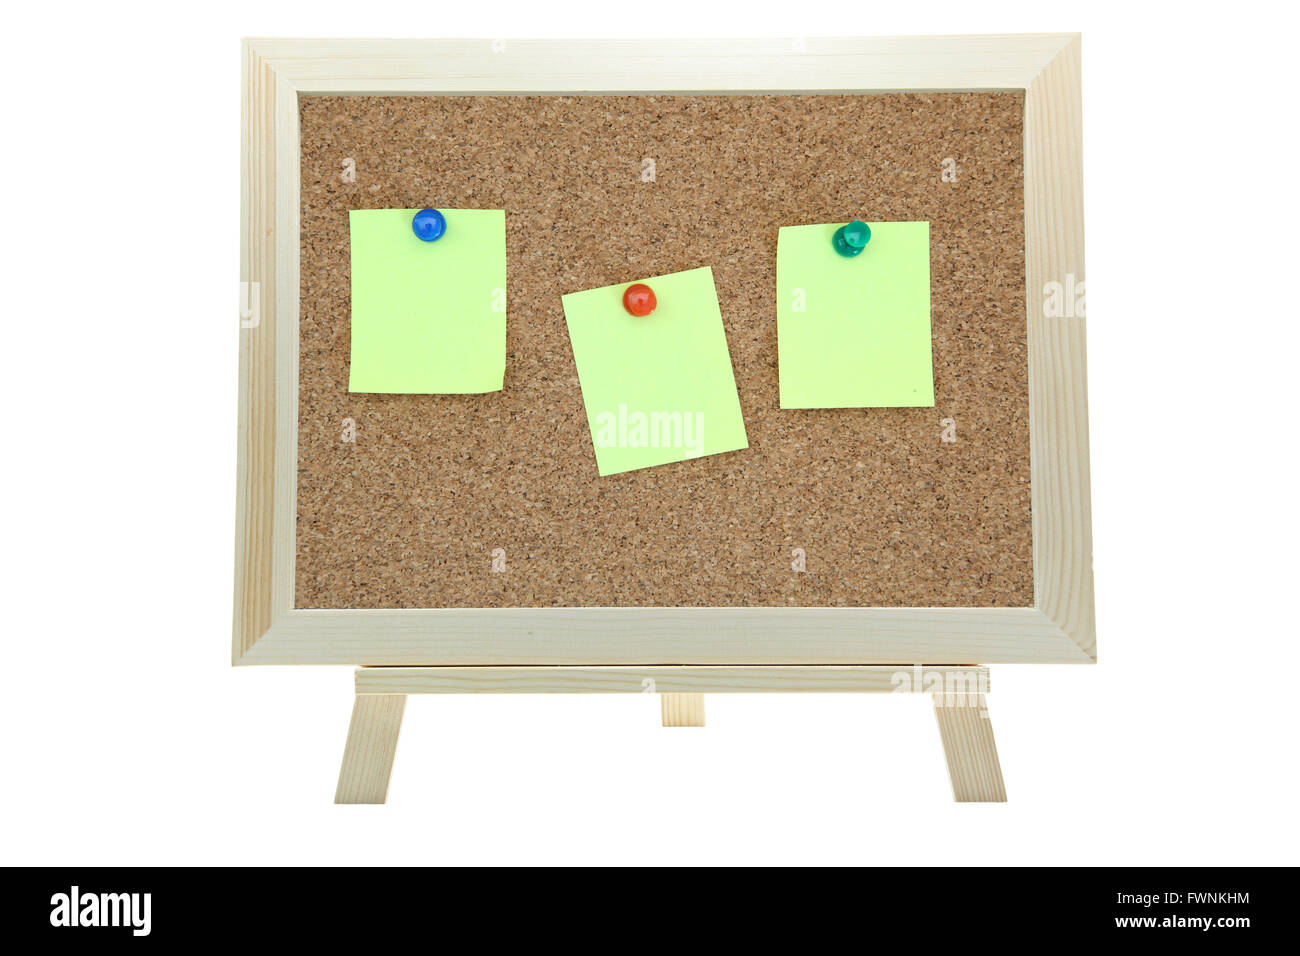 Note Paper Sticker Attached To The Cork Board Stock Illustration